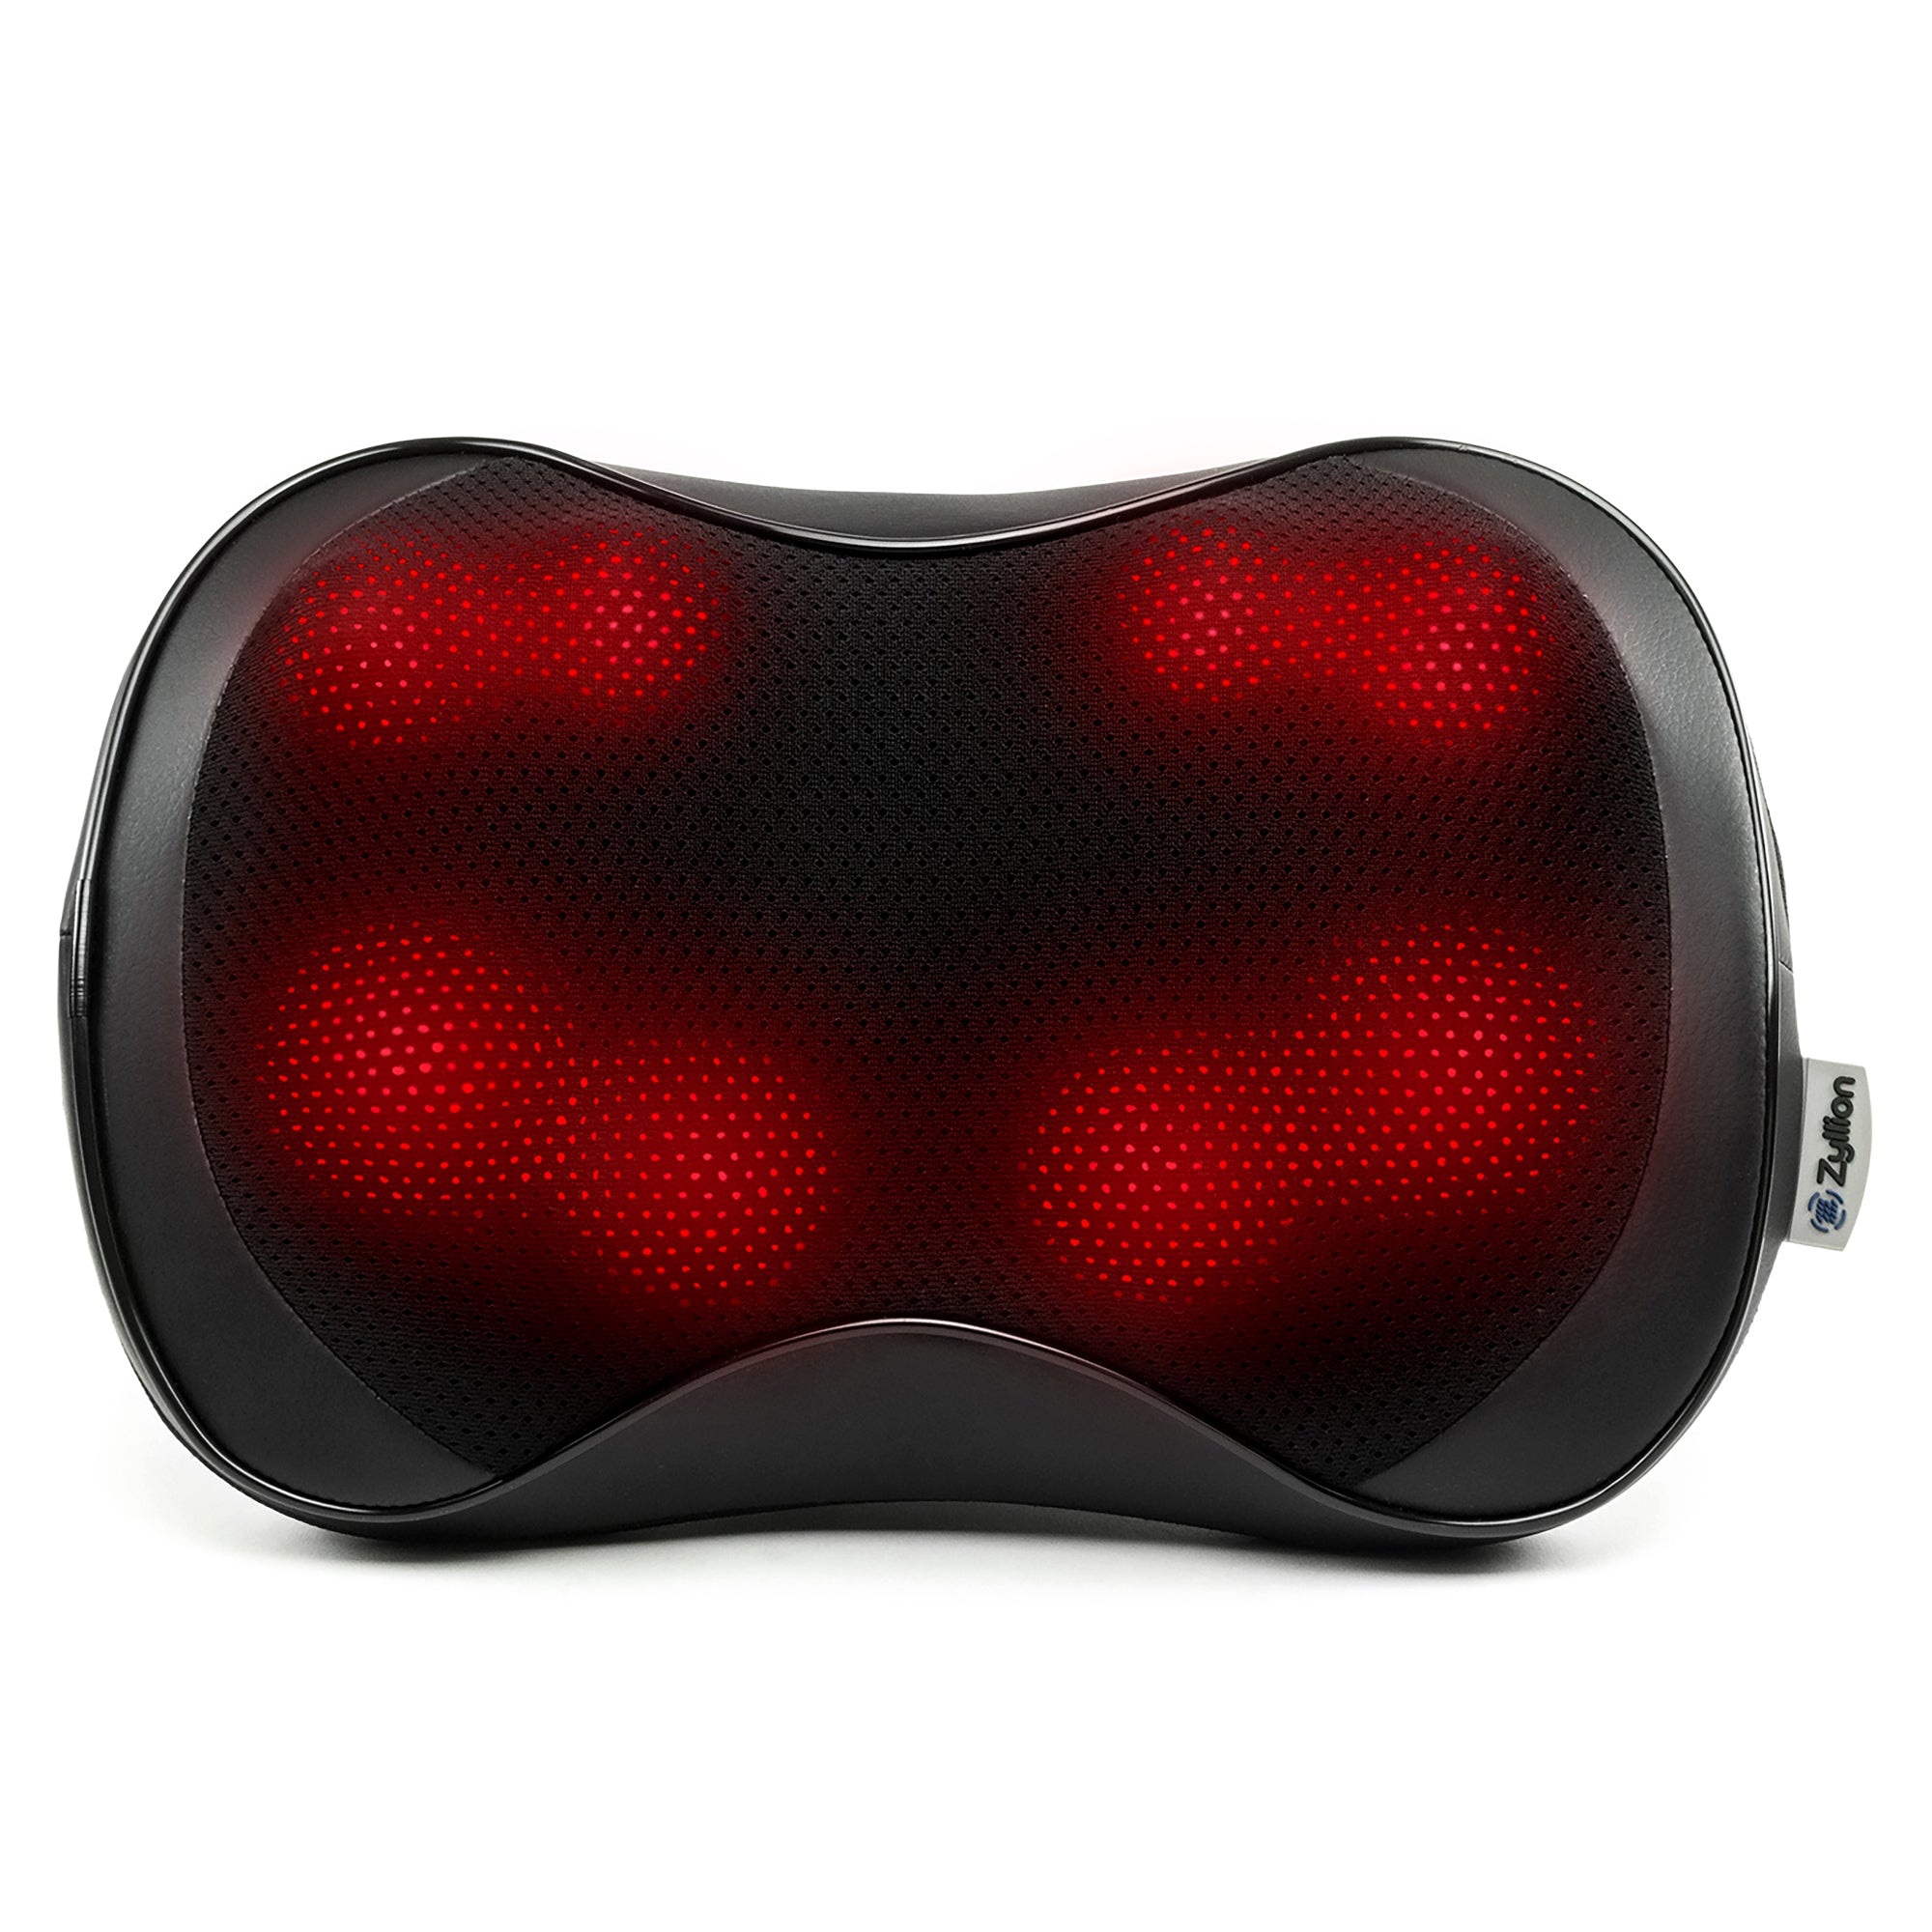 1byone Shiatsu Deep-Kneading Massager with Heat and Car Adapter for Neck,  Shoulder, Back, Arms, Legs Massage